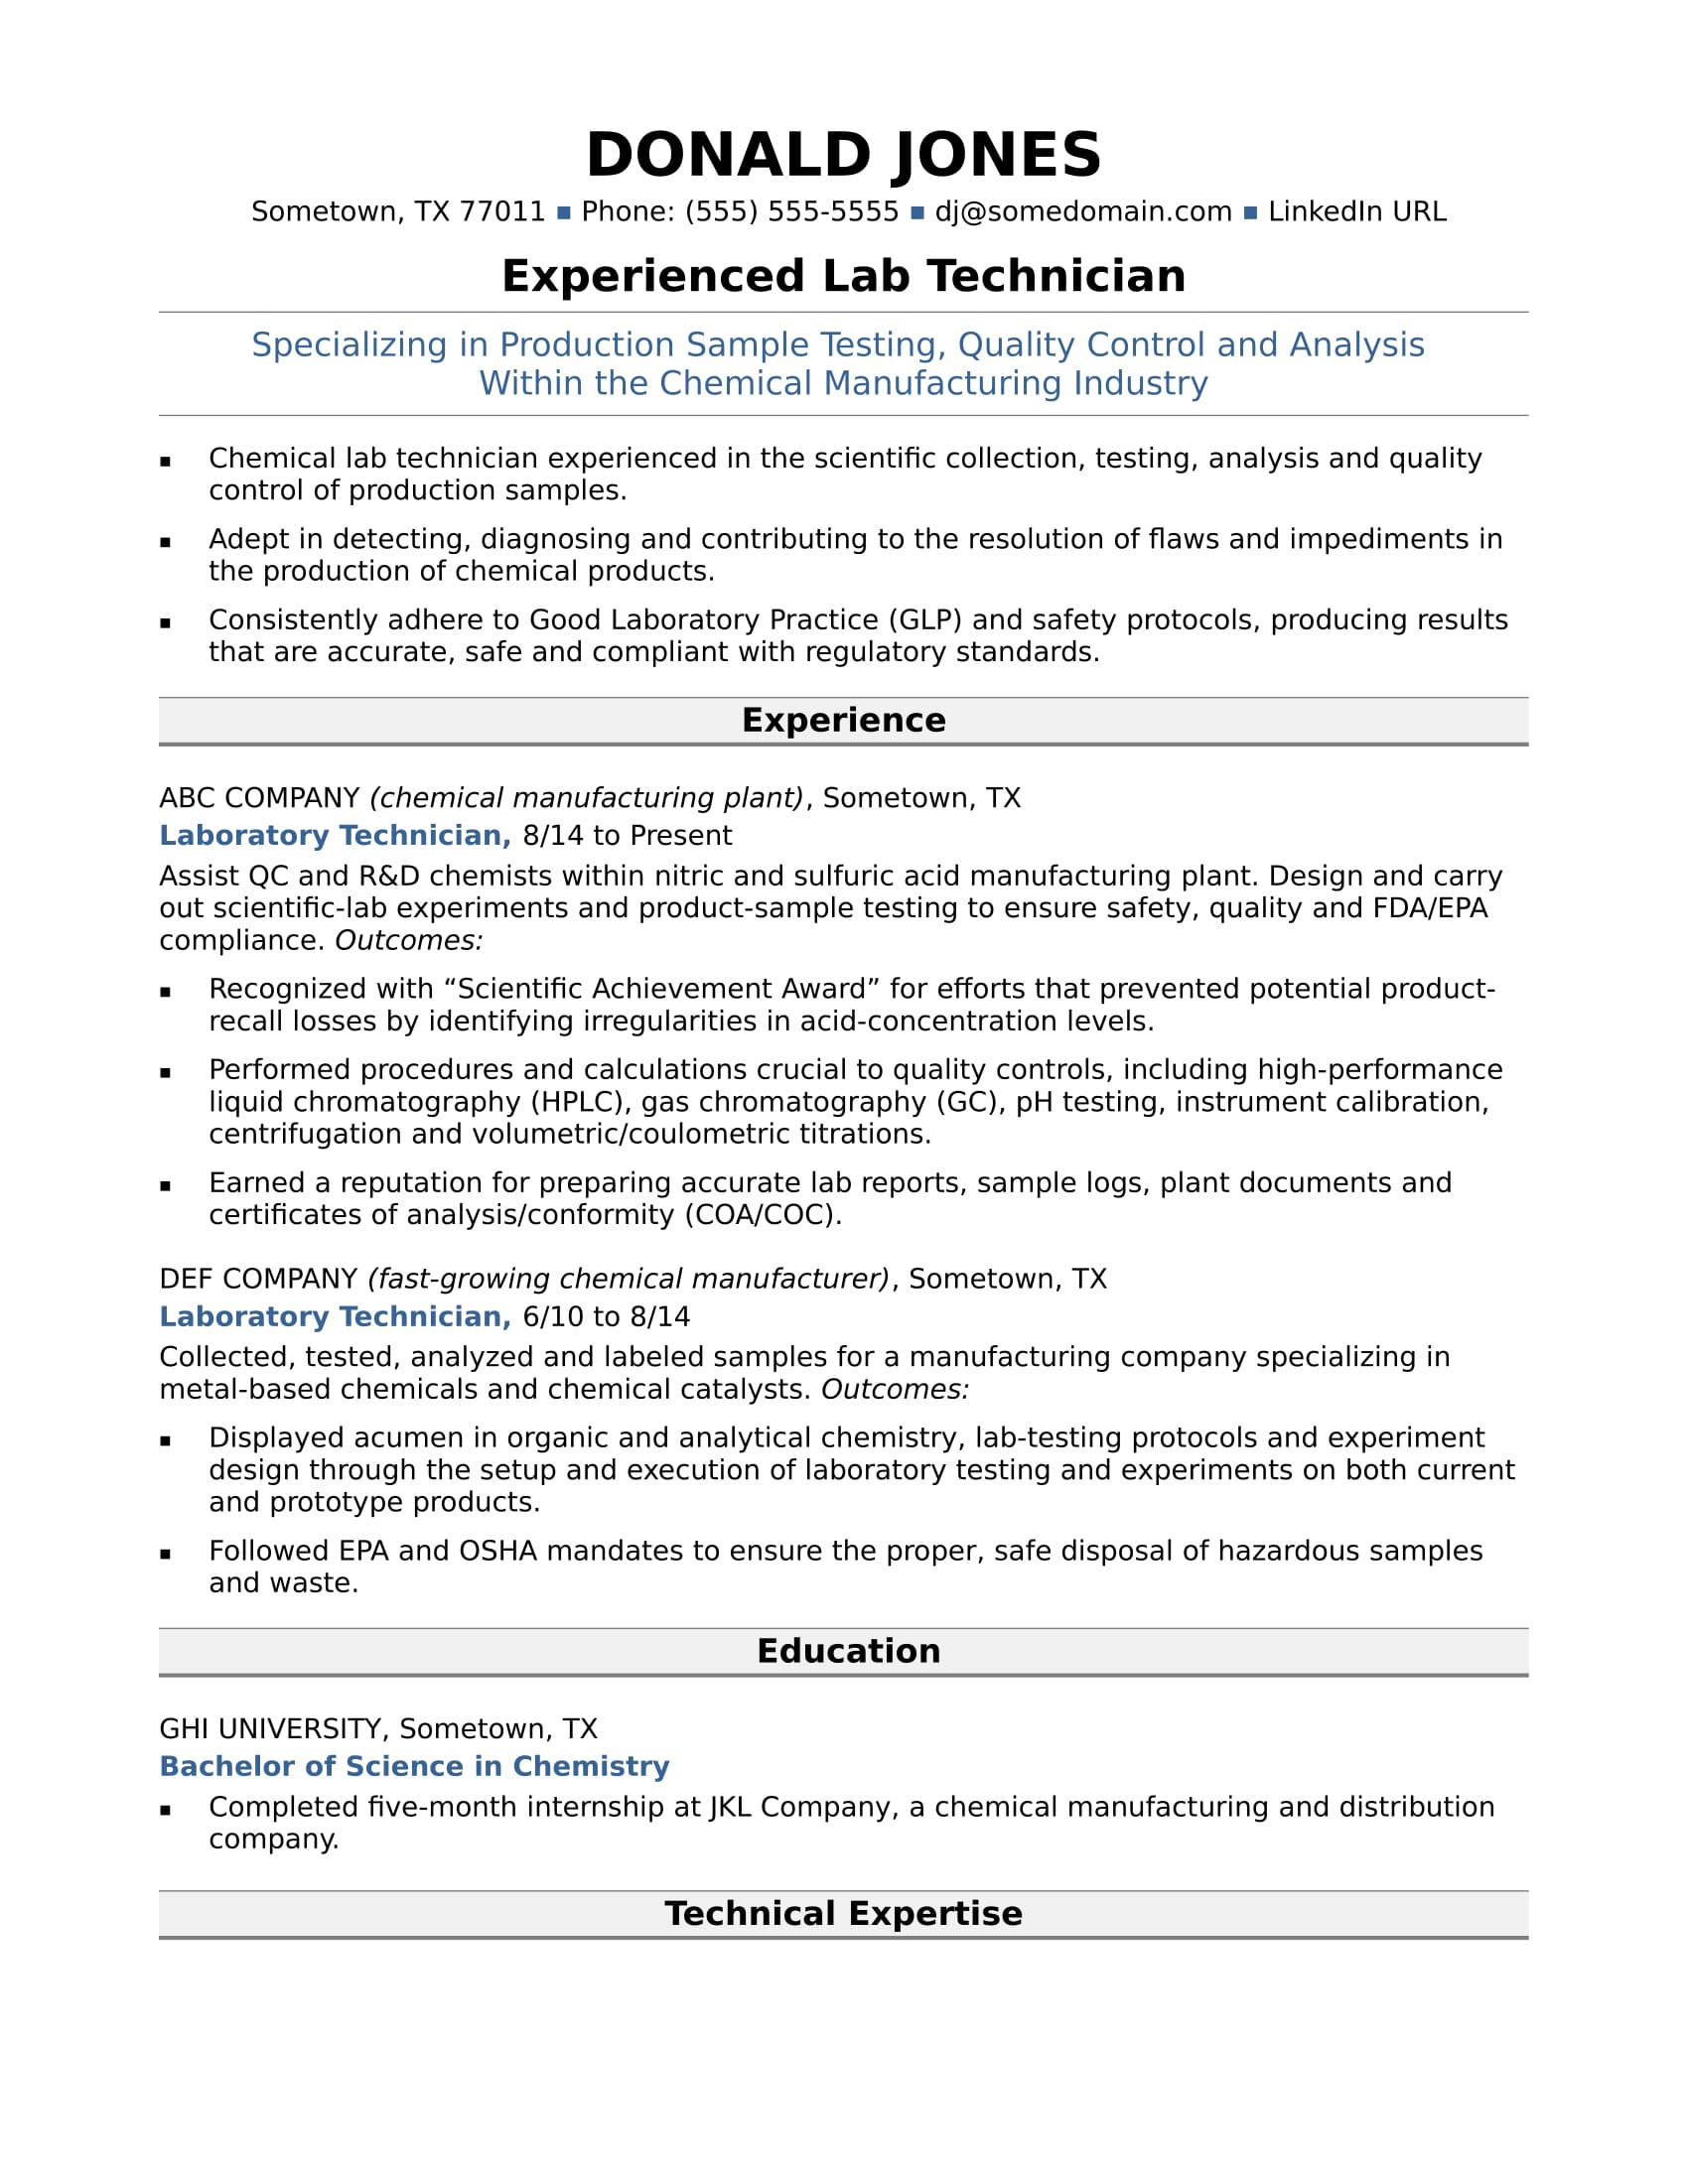 Sample Resume From A Lab Technician Senior Laboratory Technician Resume Sample Monster.com